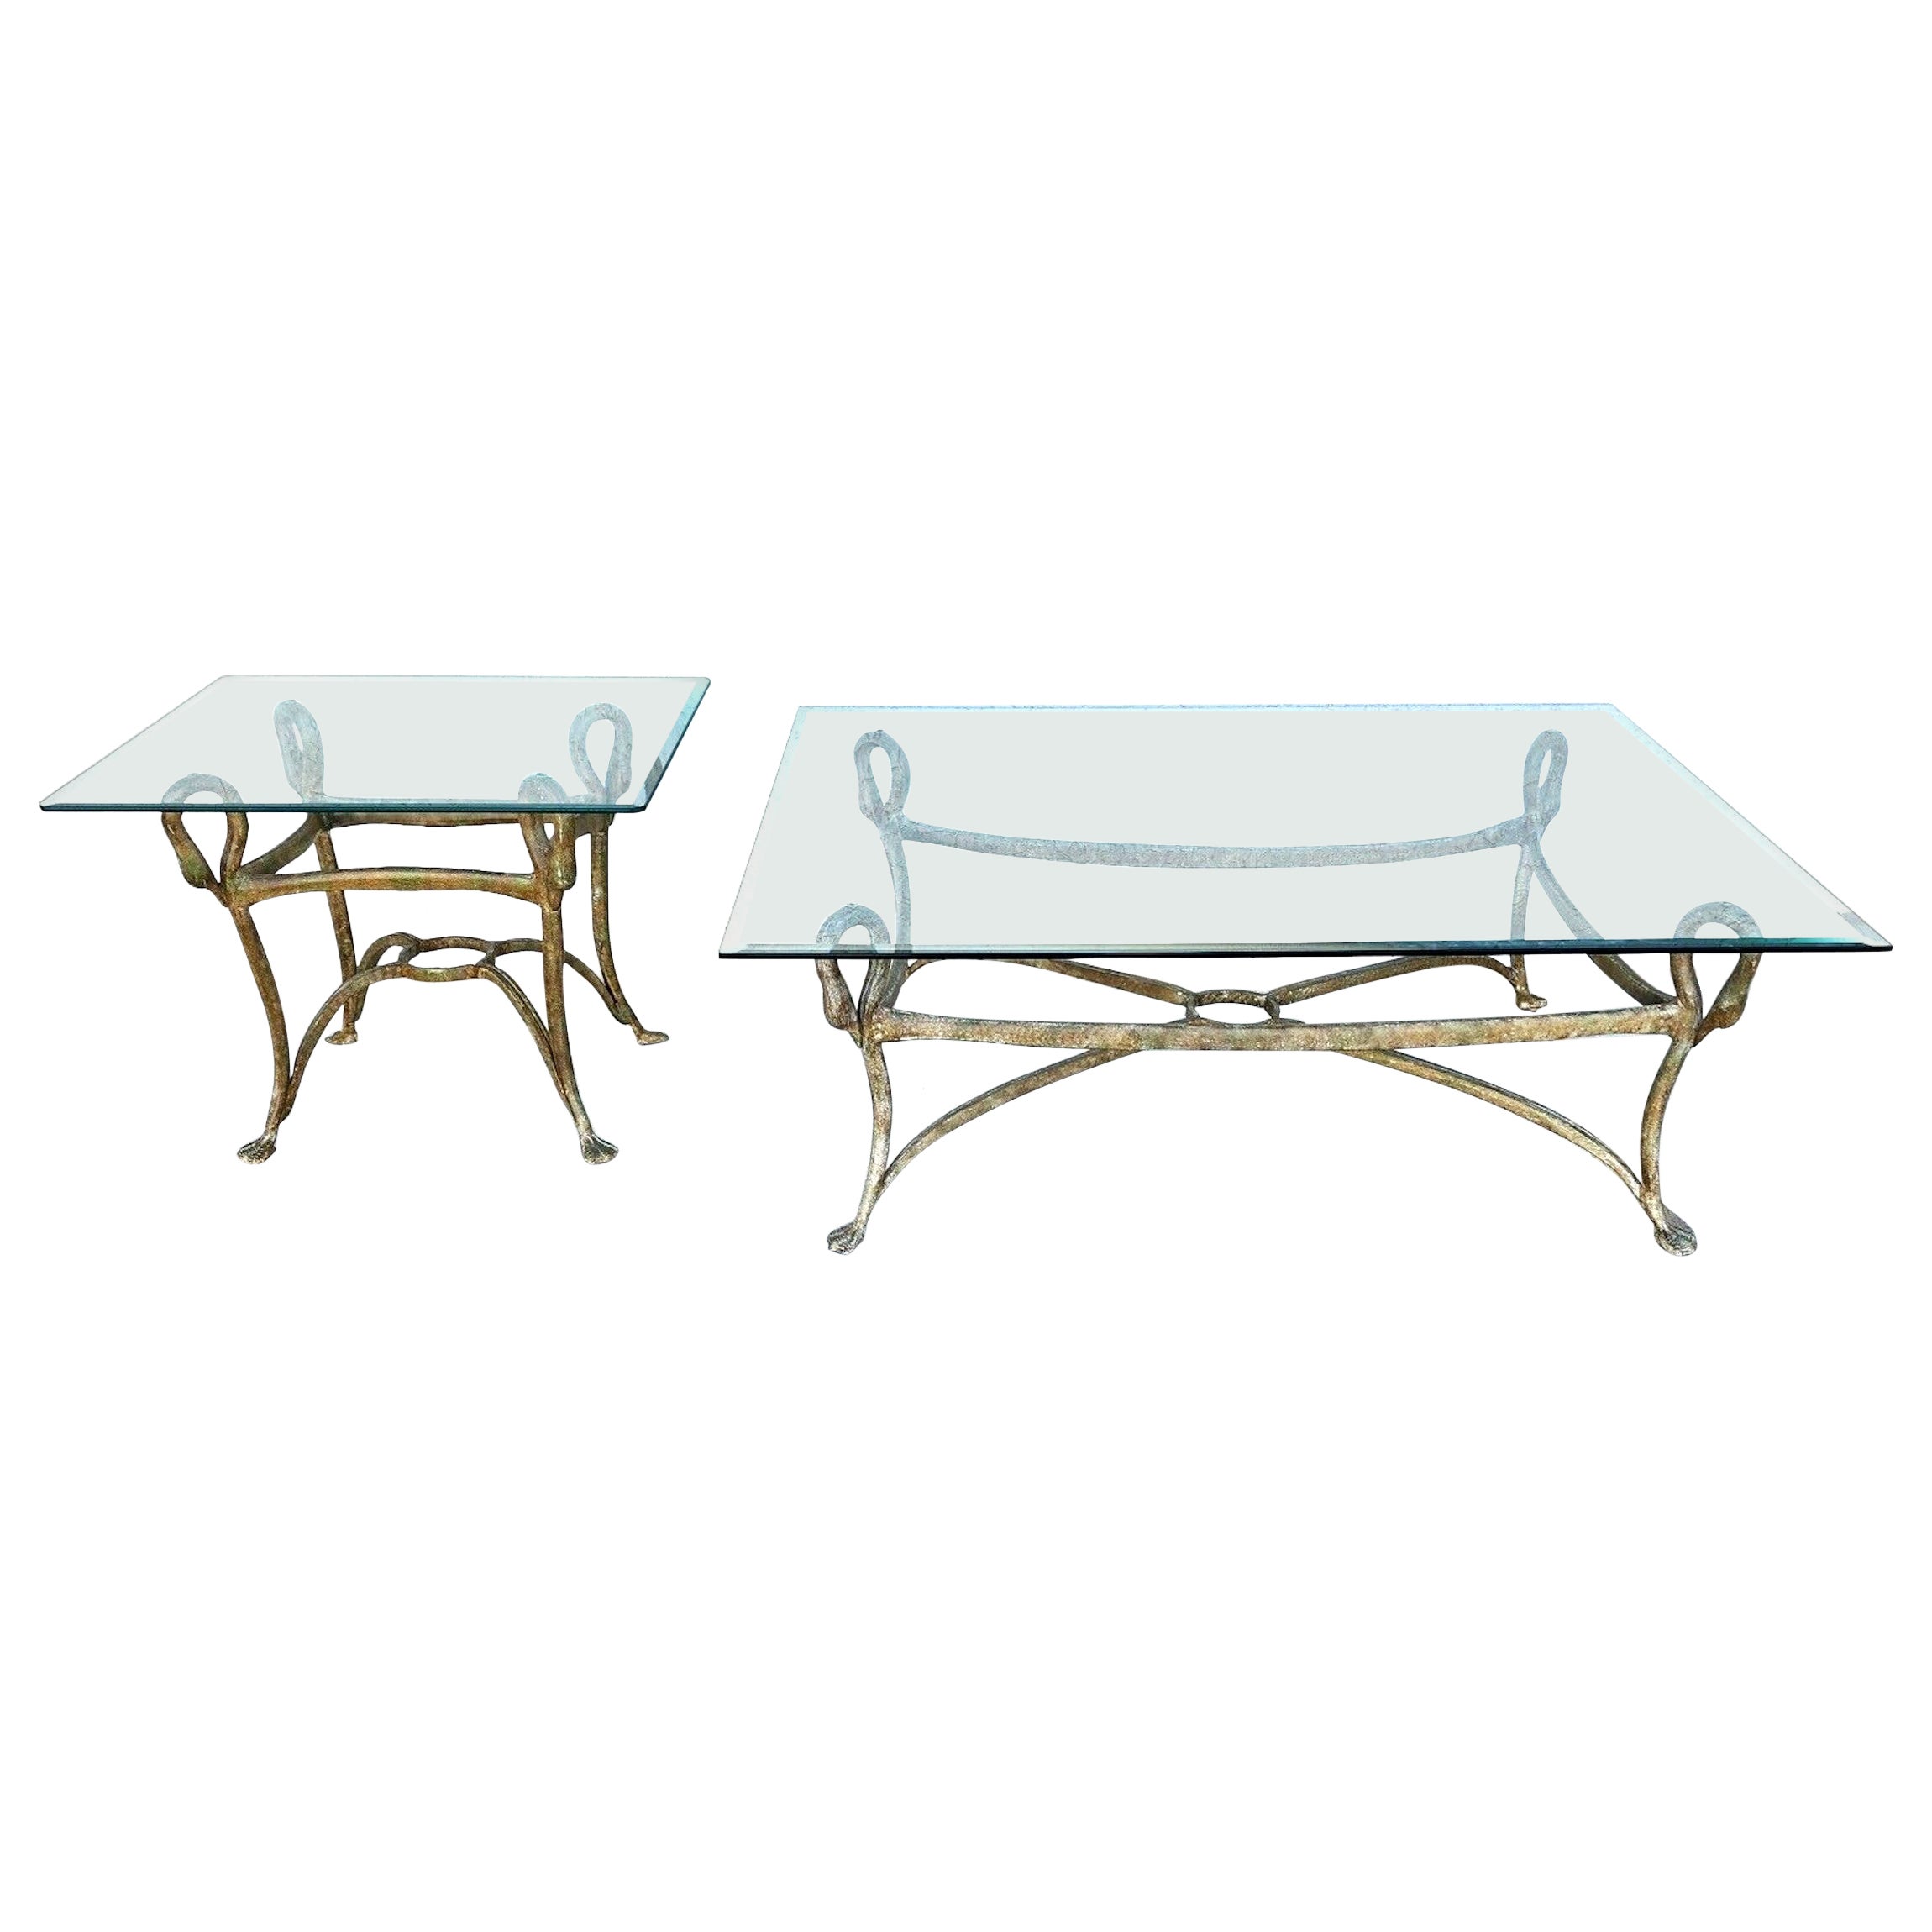 Maison Jansen Style Swan Tables Set of 2 For Sale